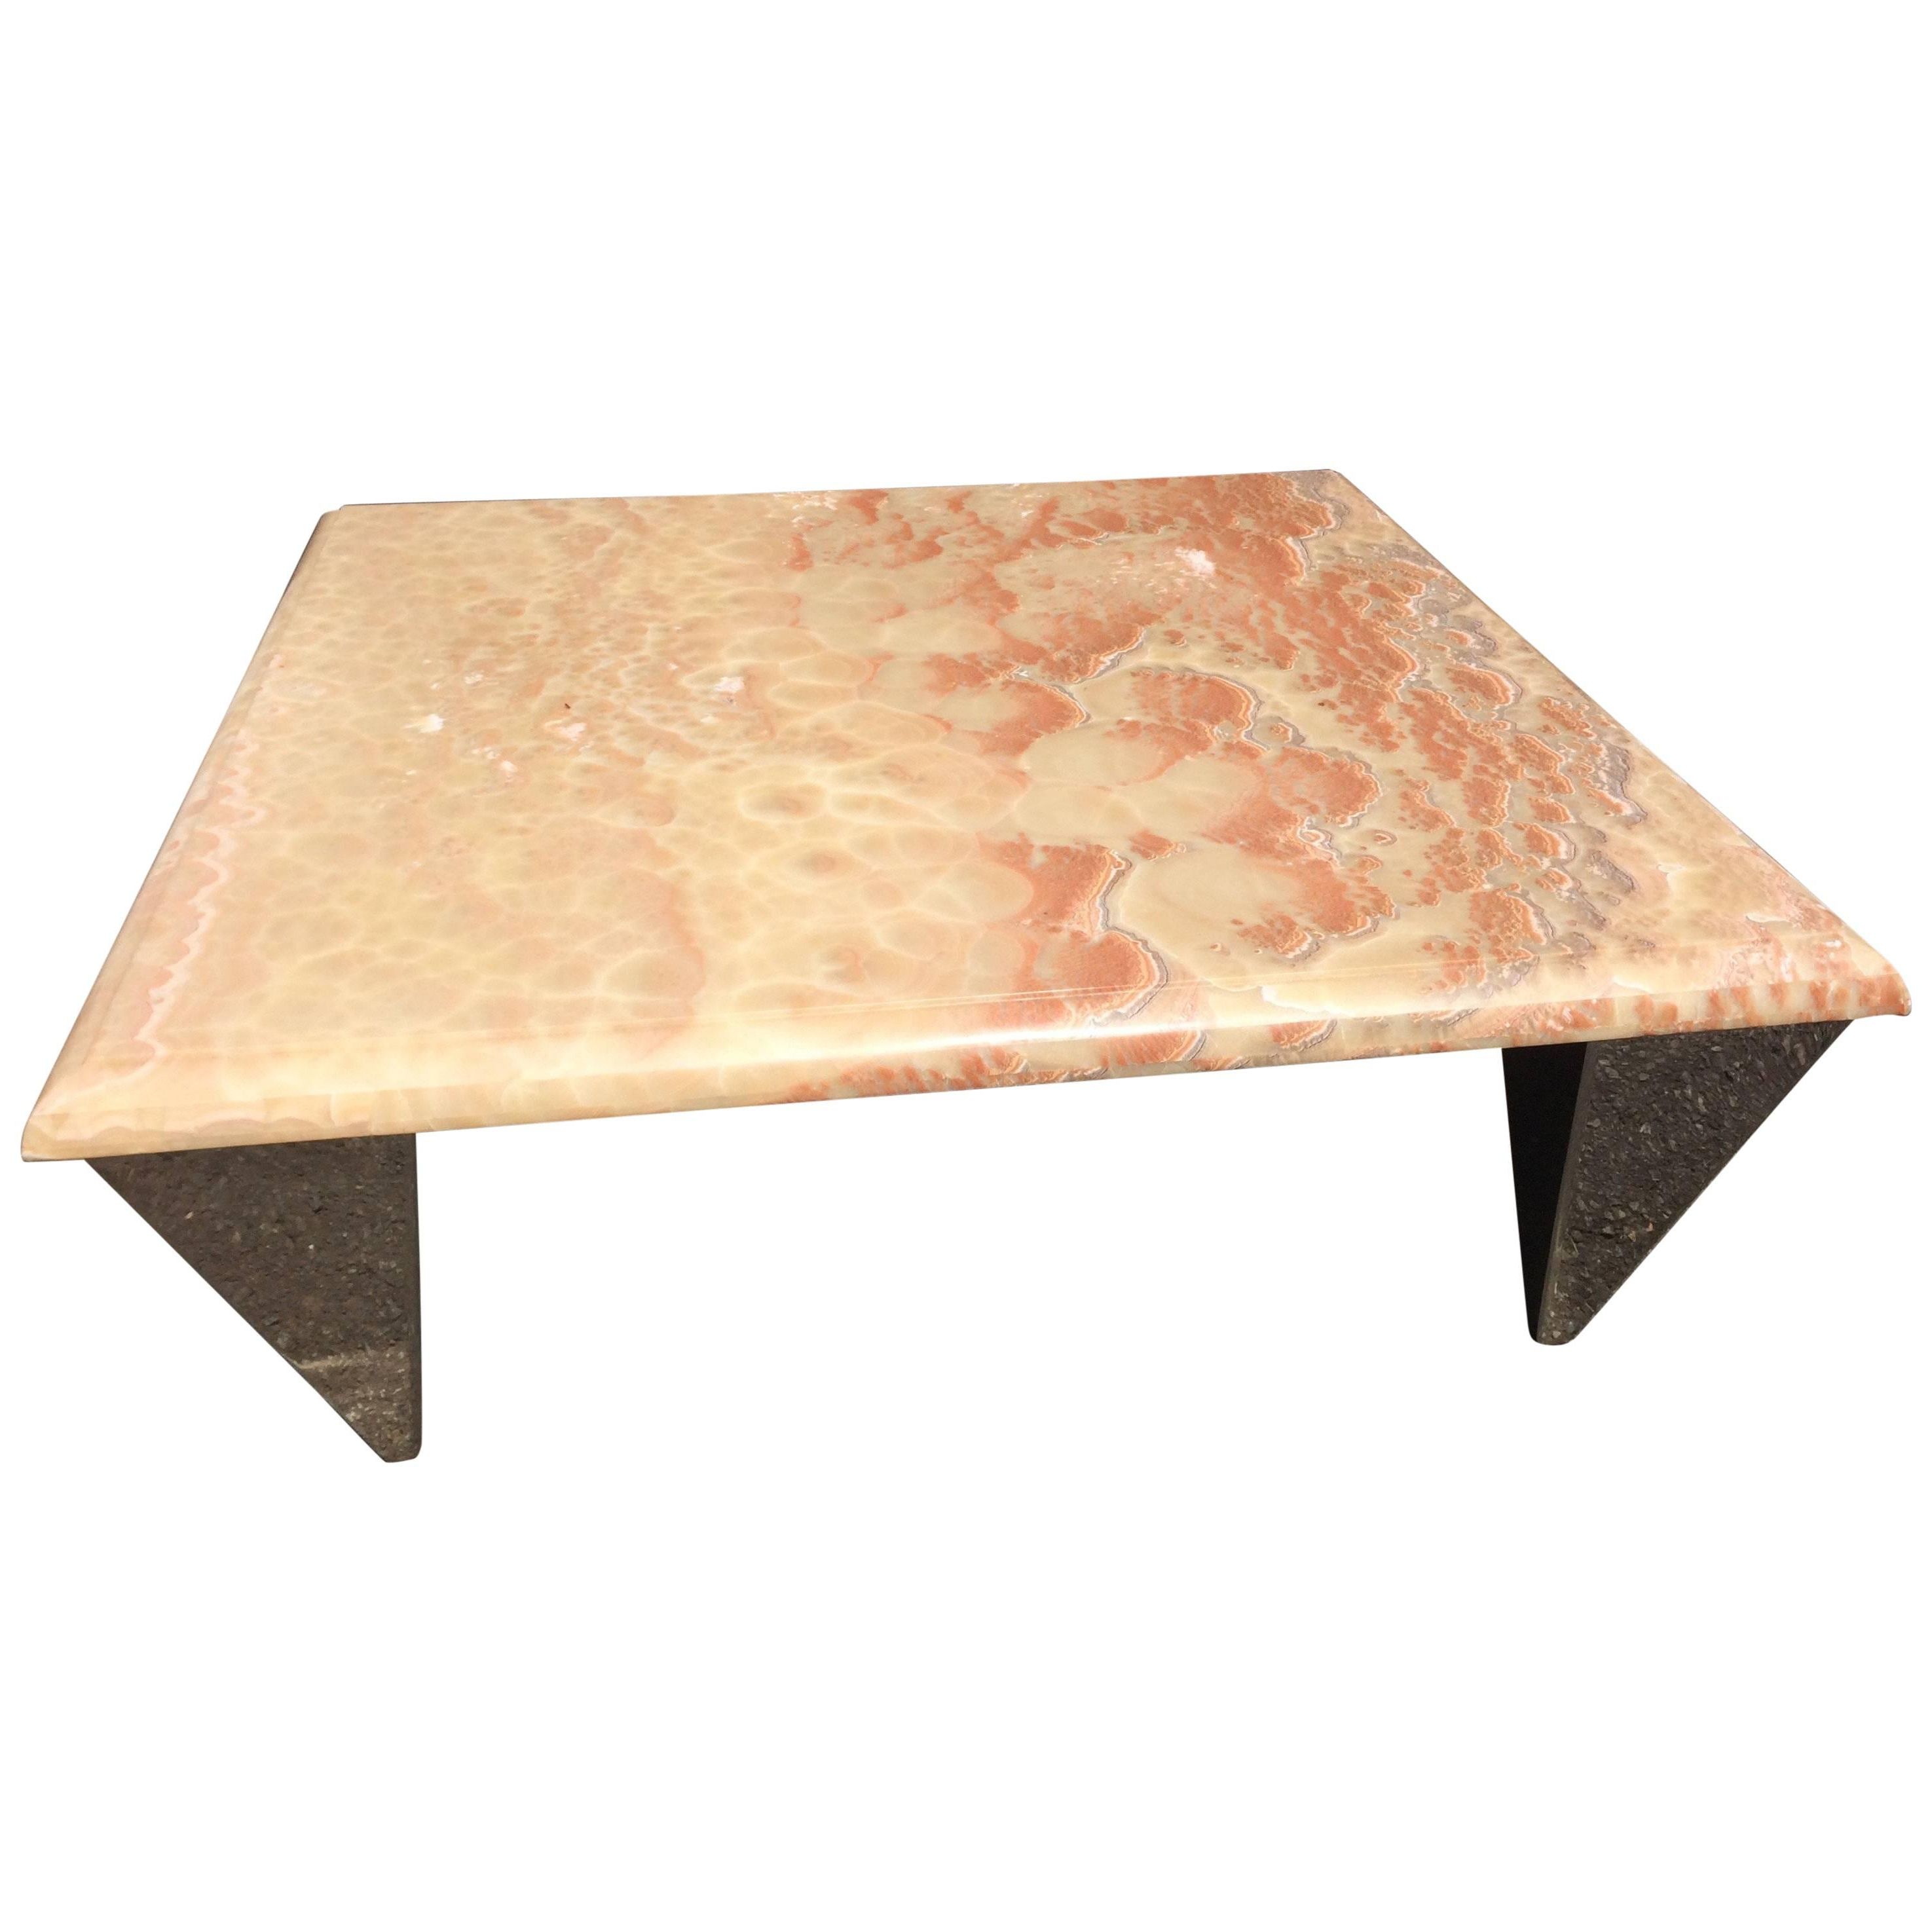 Slab Large Marble Coffee Tables With Brass Base For Favorite Sensational Huge Marble Slab Mid Century Modern Coffee Table At 1stdibs (View 8 of 20)